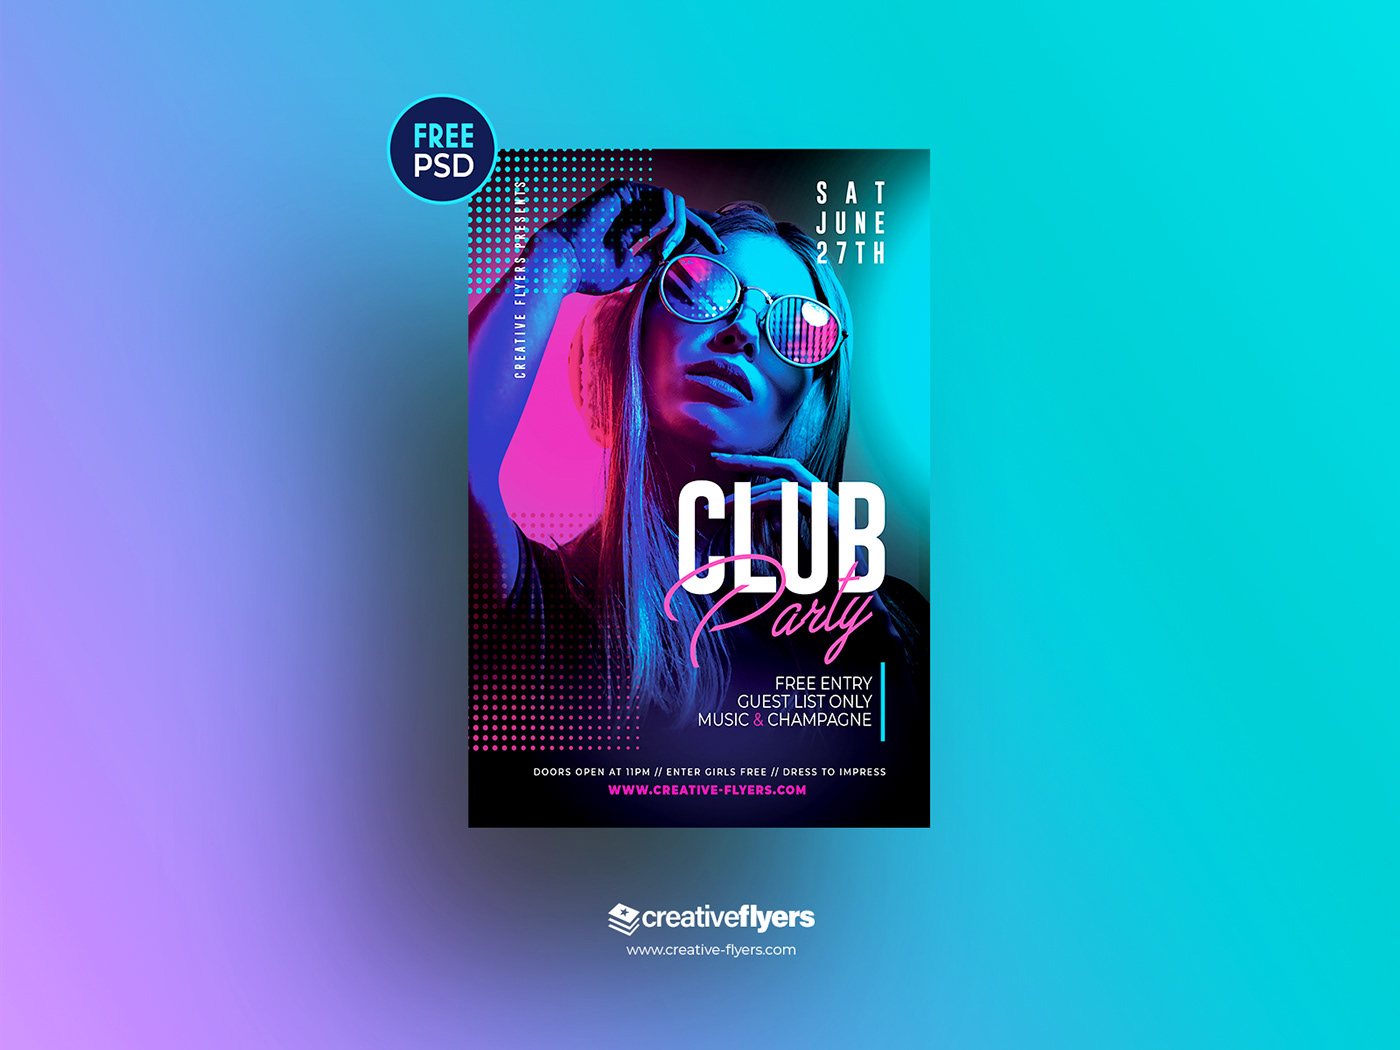 Free PSD Flyer Template for Night Club  Behance Pertaining To Free Nightclub Flyer Templates